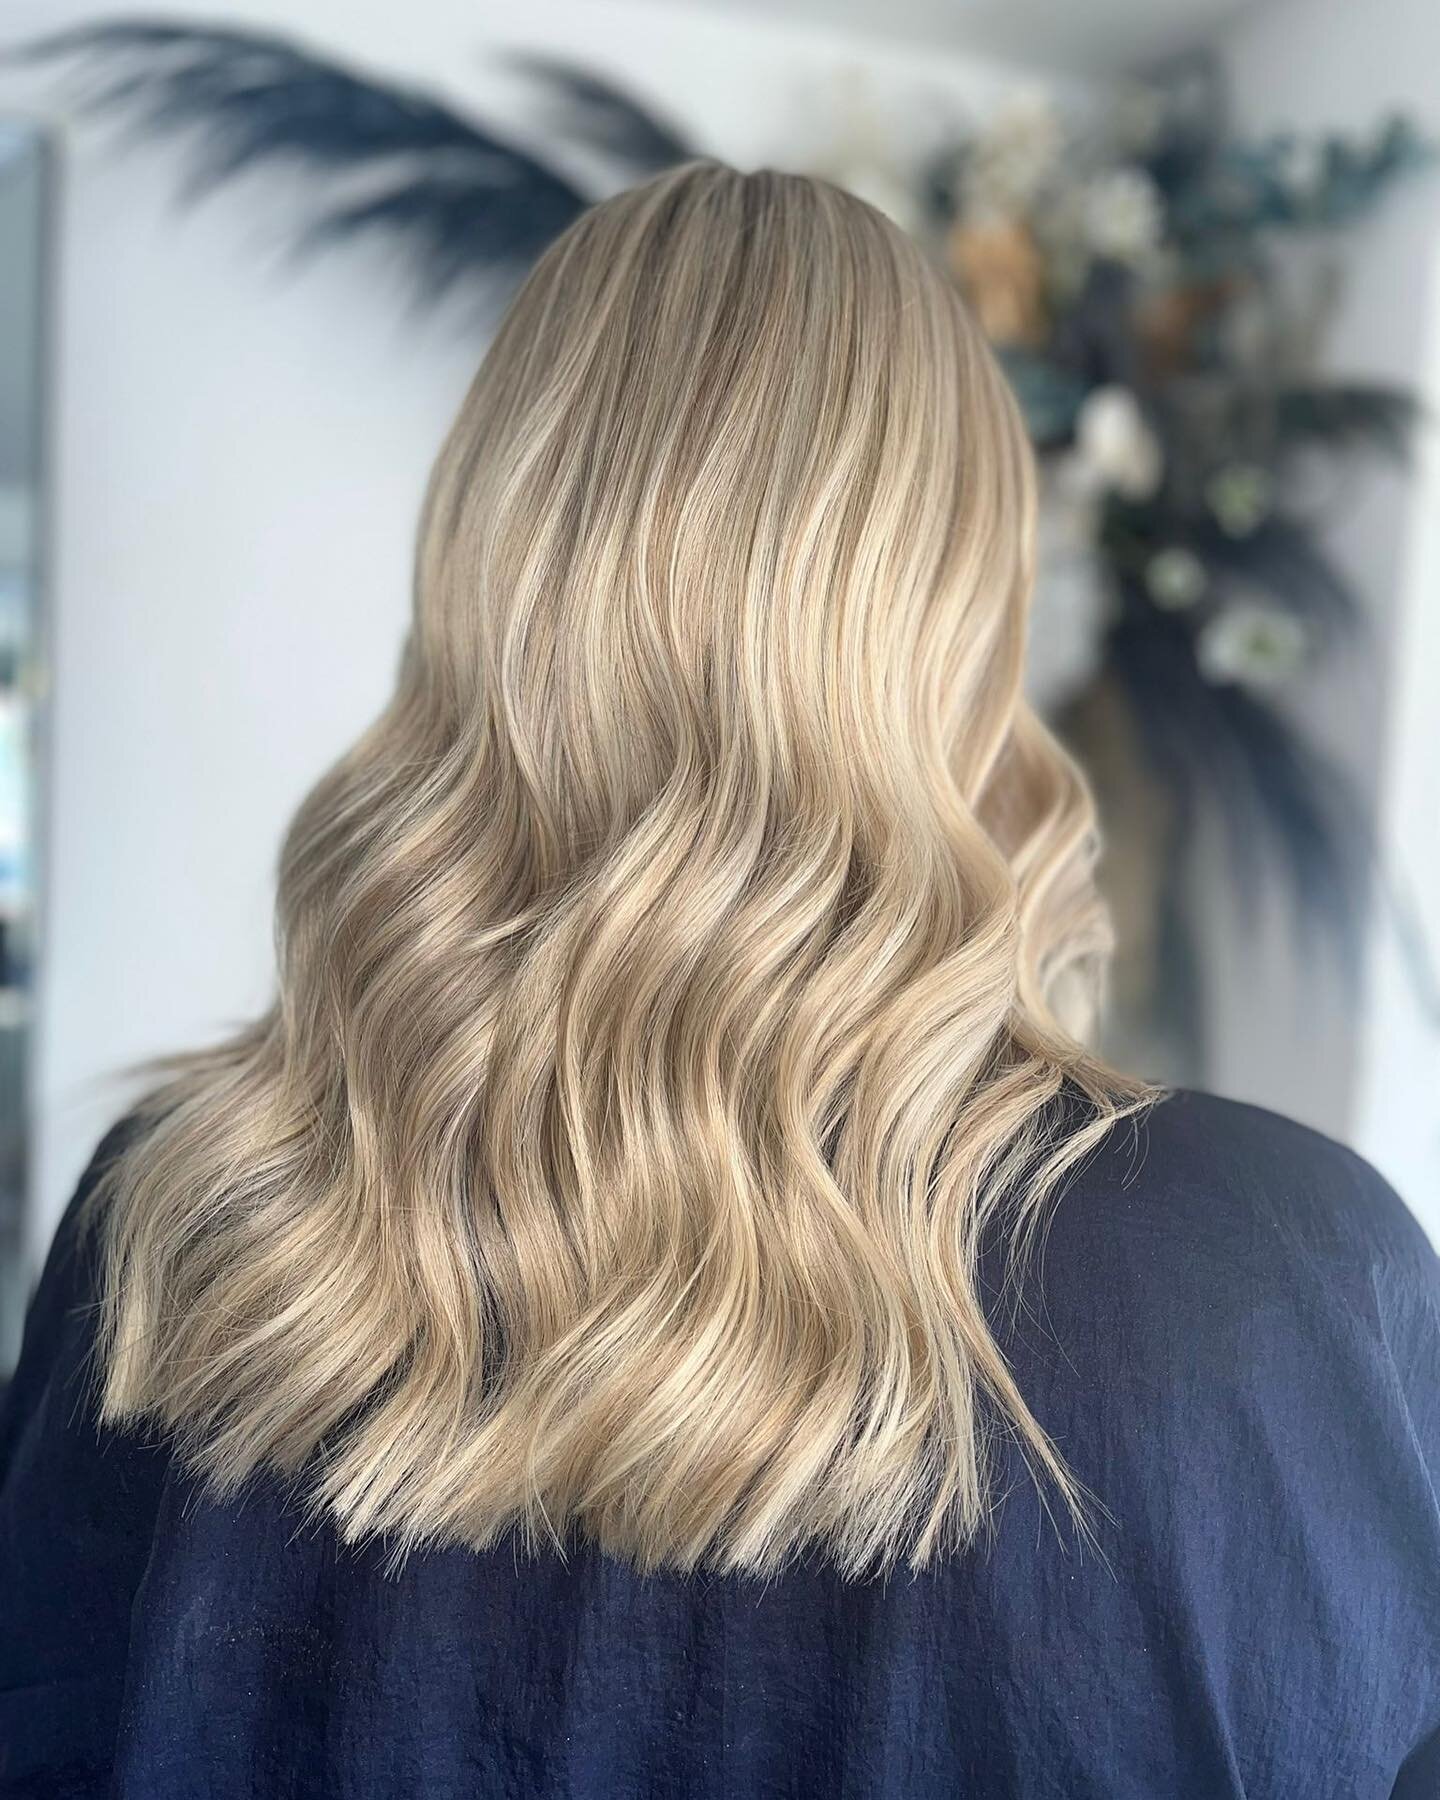 Swipe to see this before,love this transformation done by millie. 

#trasformation #mksalon #salon #kevinmurphy #blonde